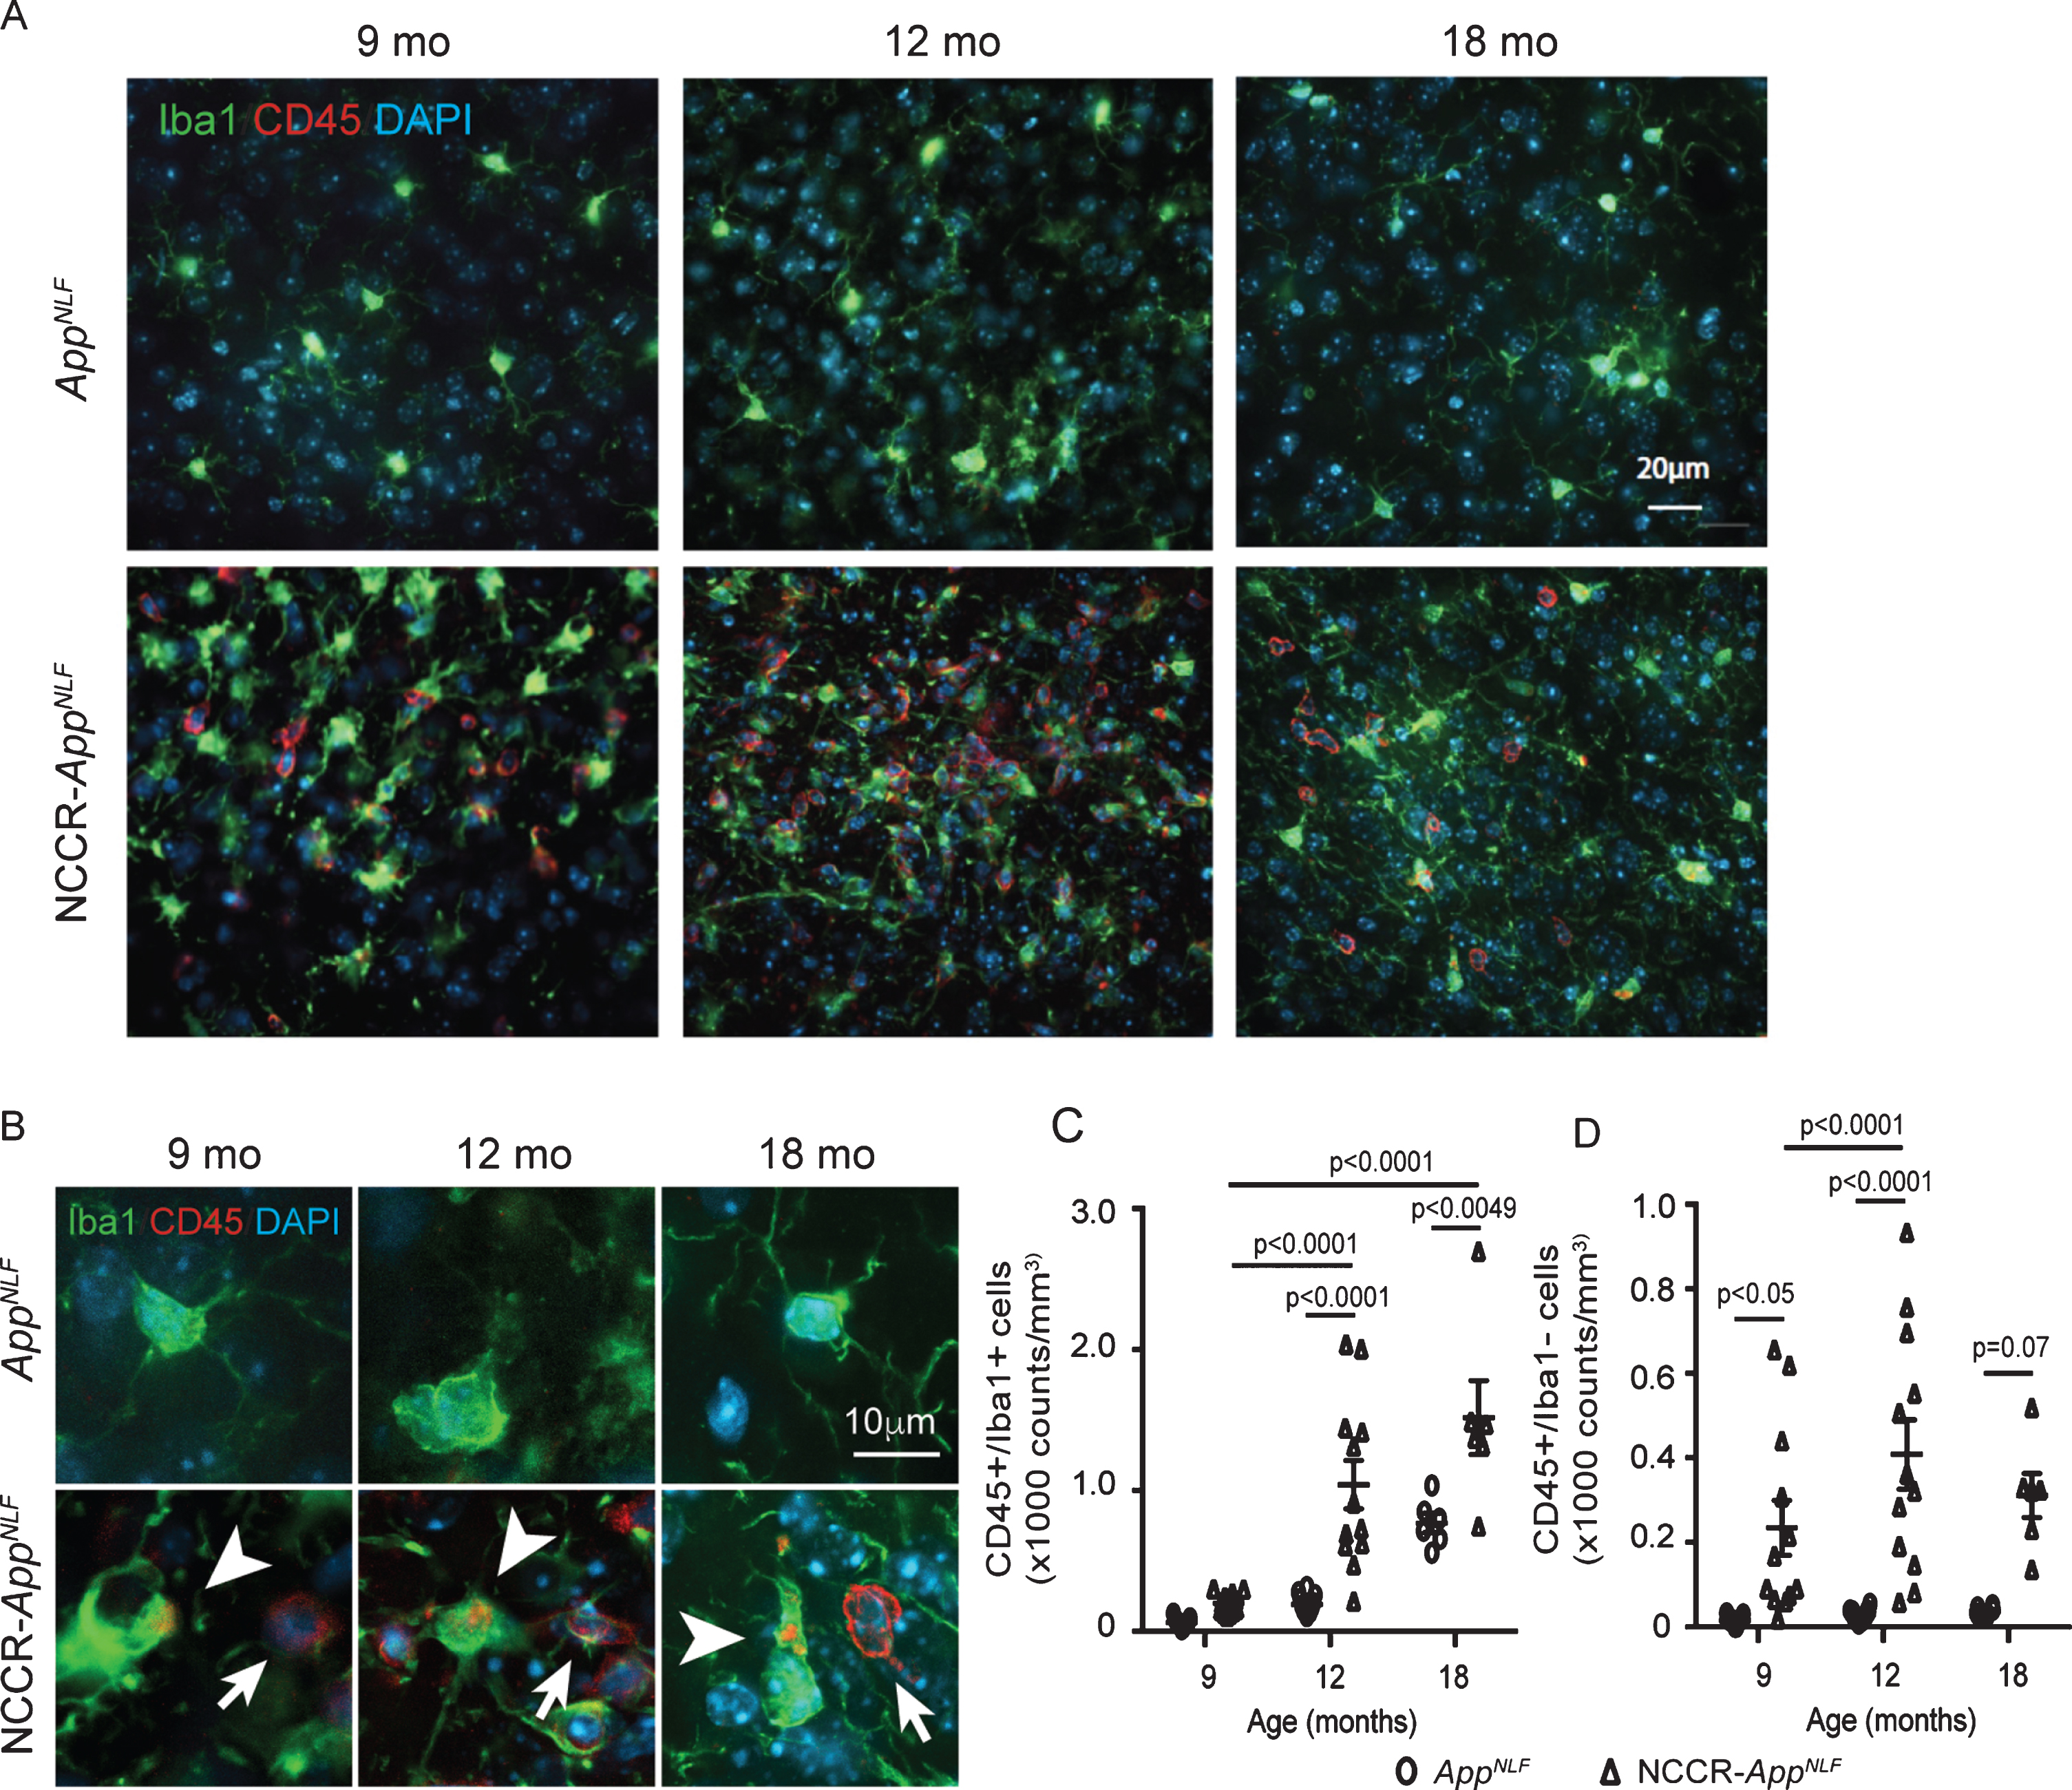 Neuronal cell cycle re-entry increases neuroinflammation in AppNLF mice. A) Representative fluorescently labeled cortical images (primary somatosensory region) showing Iba1 (green), CD45 (red), and DAPI (blue) showing increased CD45 labeling in the NCCR-AppNLF animals at 9, 12, and 18 months of age. B) Higher magnification images of CD45 (red), Iba1 (green), and DAPI (blue) immunofluorescent labeled brain sections from NCCR-AppNLF and AppNLF animals. Leukocytes were identified by donut-shaped CD45 stains not co-localized with Iba1 labeling in the cortex (arrows). Activated microglia were identified by Iba1 stained cells co-labeled with CD45 (arrowheads). C) Two-way ANOVA showed significant age effect (F(2, 53) = 35.74, p < 0.0001), genotype effect (F(1, 53) = 38.11, p < 0.0001), and interaction effect (F(2, 53) = 7.052, p < 0.0019) on CD45-positive microglia counts. Number of CD45/Iba1 co-labeled cells were increased in NCCR-AppNLF mice compared to AppNLF mice at 12 and 18 months of age, suggesting enhanced neuroinflammation (Tukey’s multiple comparison test). D) Two-way ANOVA showed significant genotype effect (F(1, 53) = 39.34, p < 0.0001) on CD45-postive, Iba1-negative cells. Brain leukocyte infiltration is observed in 9-, 12-, and 18-month-old NCCR-AppNLF animals (Tukey’s multiple comparison test). The following numbers of animals were examined: 9 months: n = 4/genotype; 12 months: n = 4/genotype; 18 months: n = 2/genotype. Four matched coronal sections were measured across the animals. Each data point represents a measure from each section.